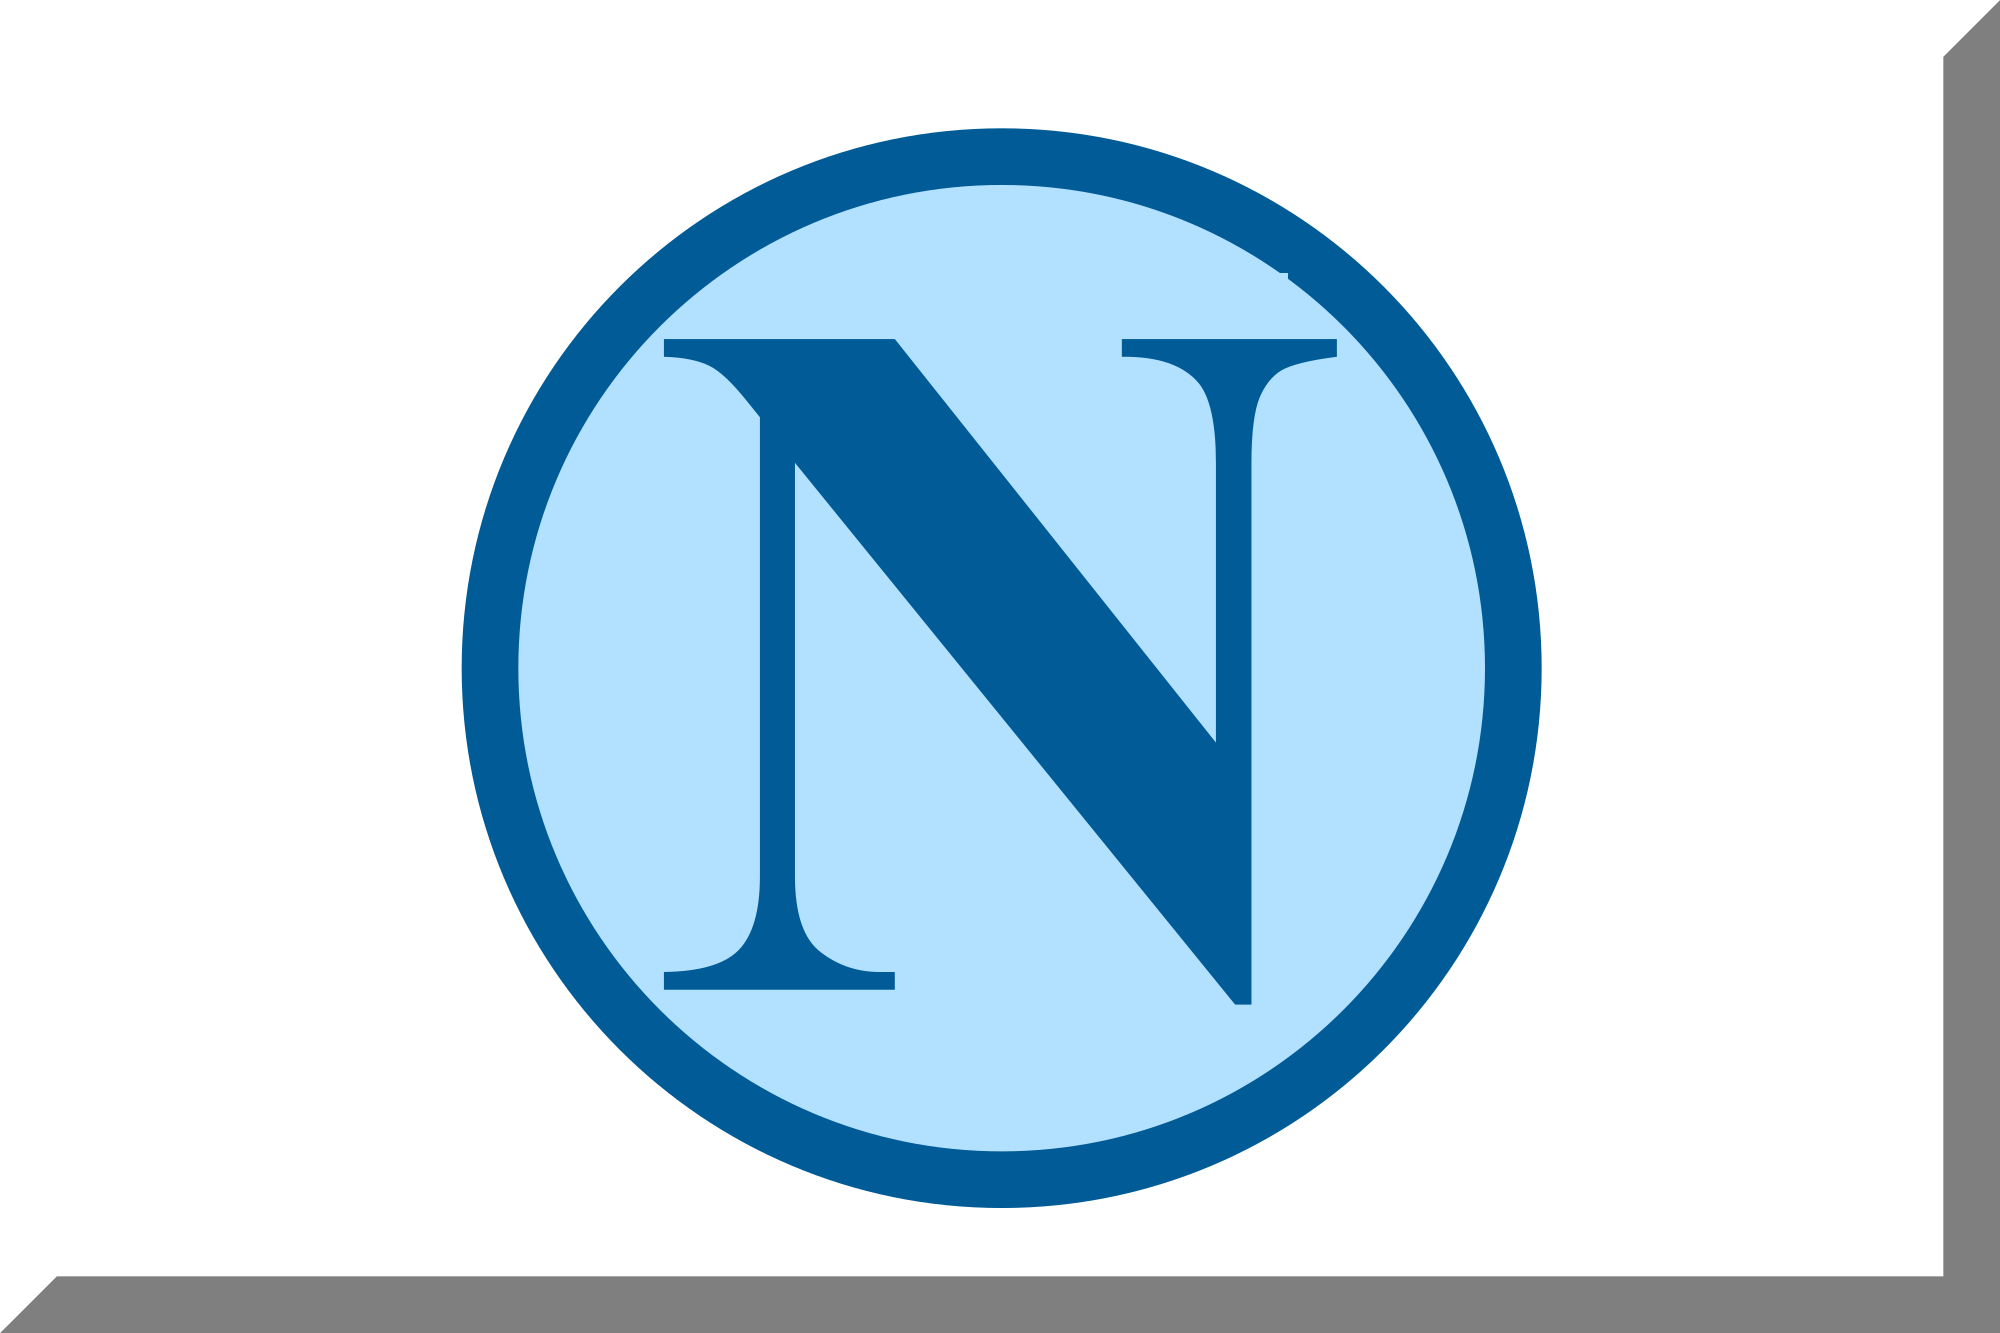 N in Circle Logo - 600px Background White Letter N HEX 005B96 On HEX B2E0FF Circle